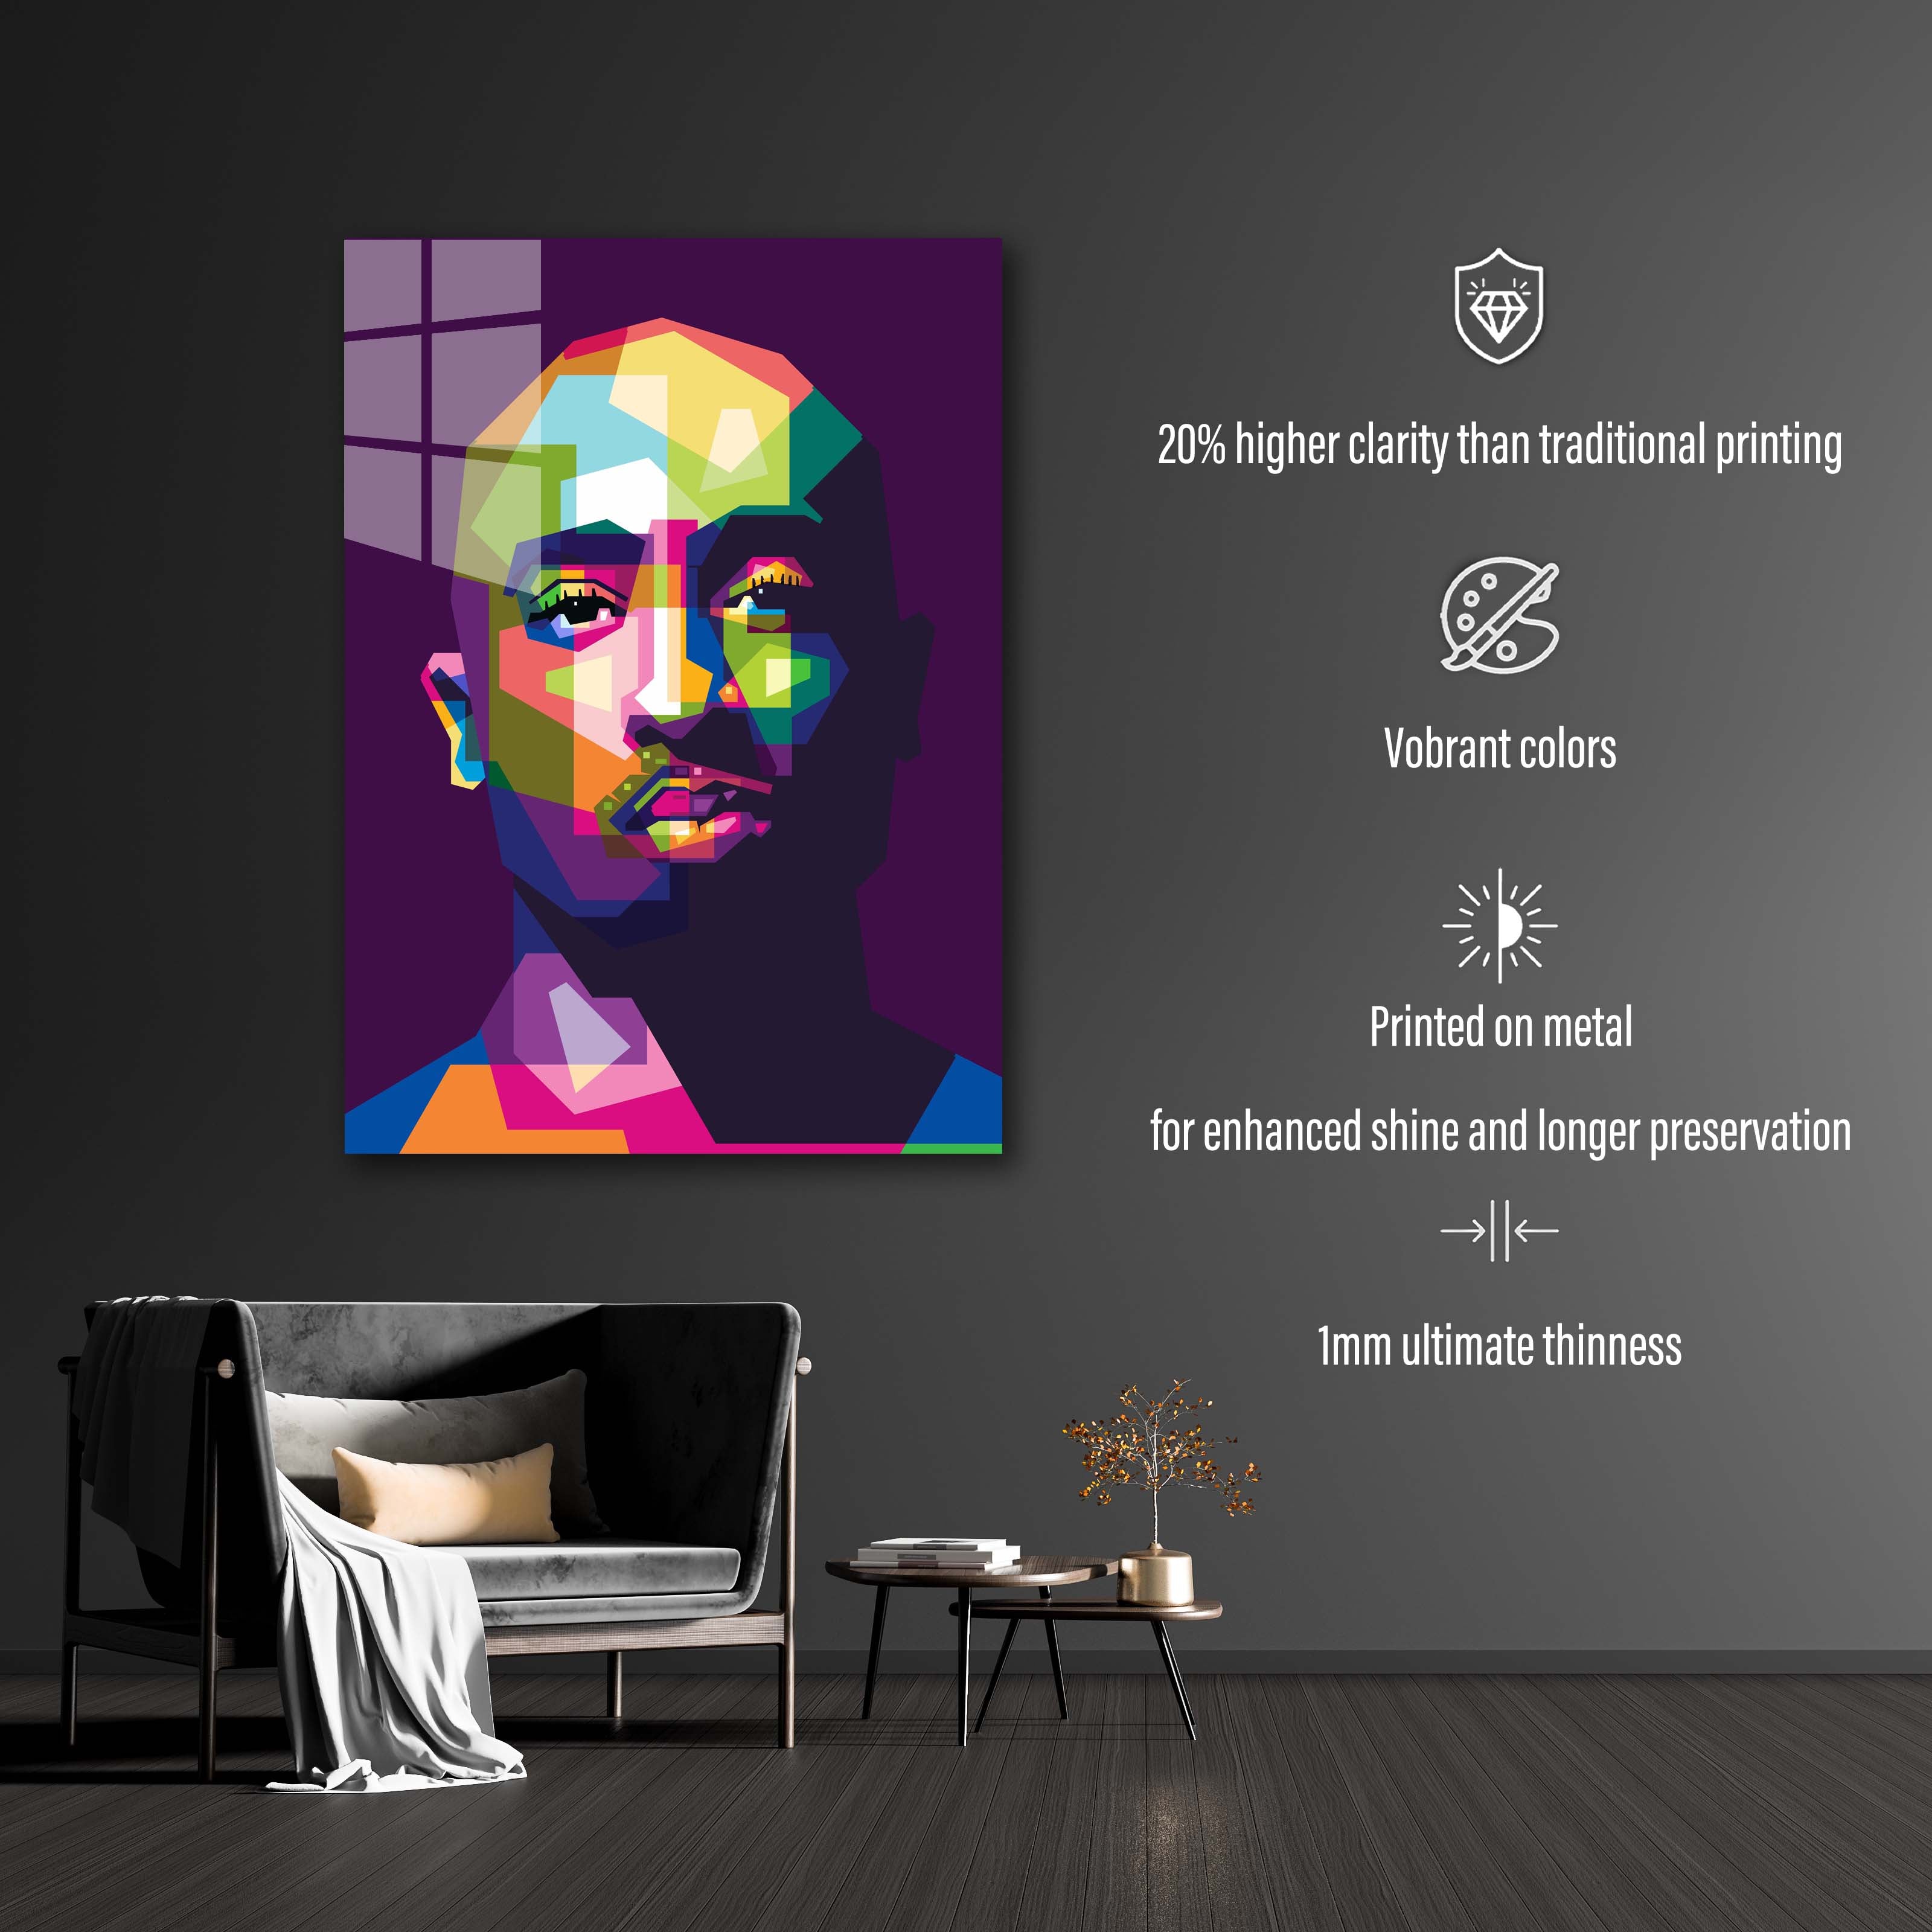 Tupac Shakur-designed by @Dico Graphy